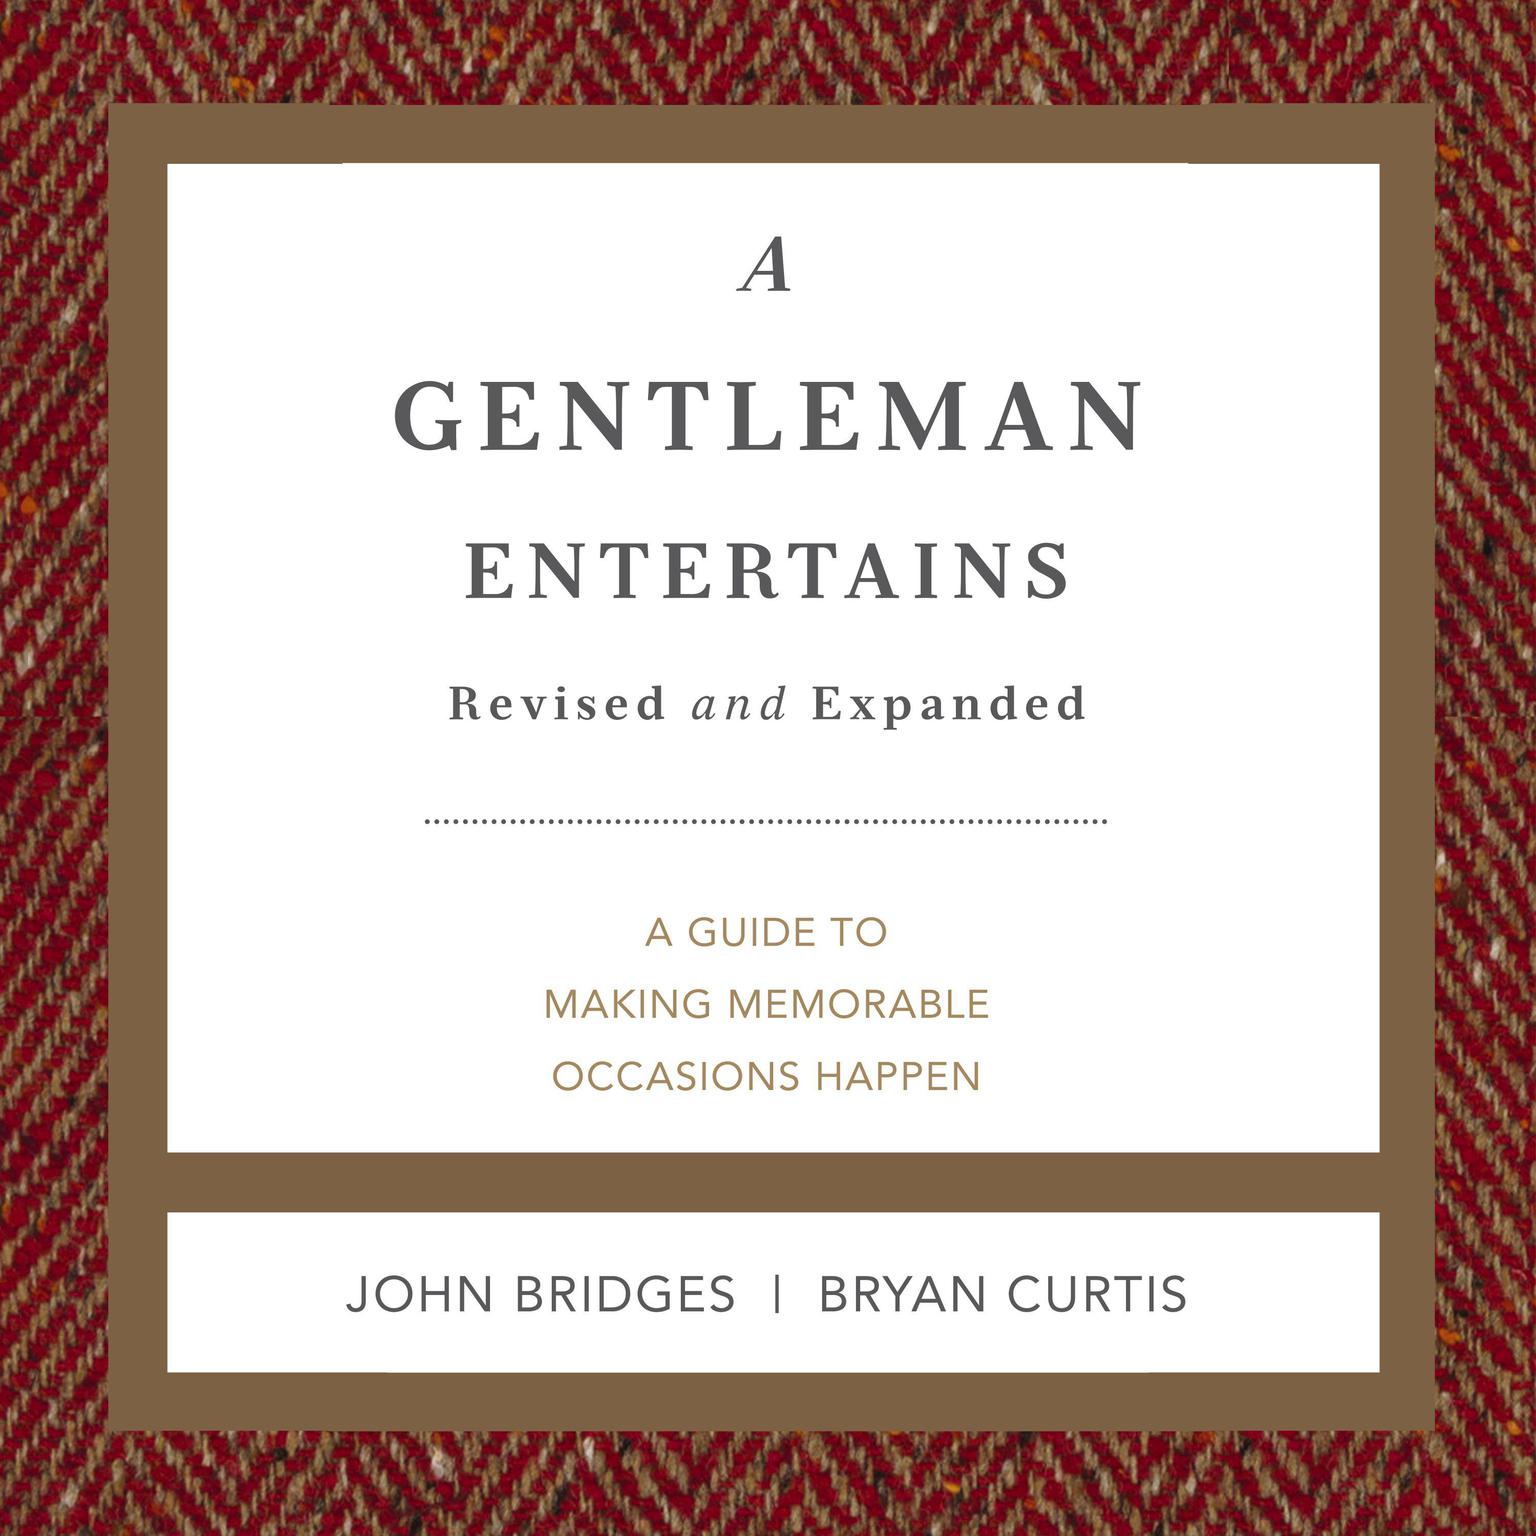 A Gentleman Entertains Revised and Expanded: A Guide to Making Memorable Occasions Happen Audiobook, by John Bridges